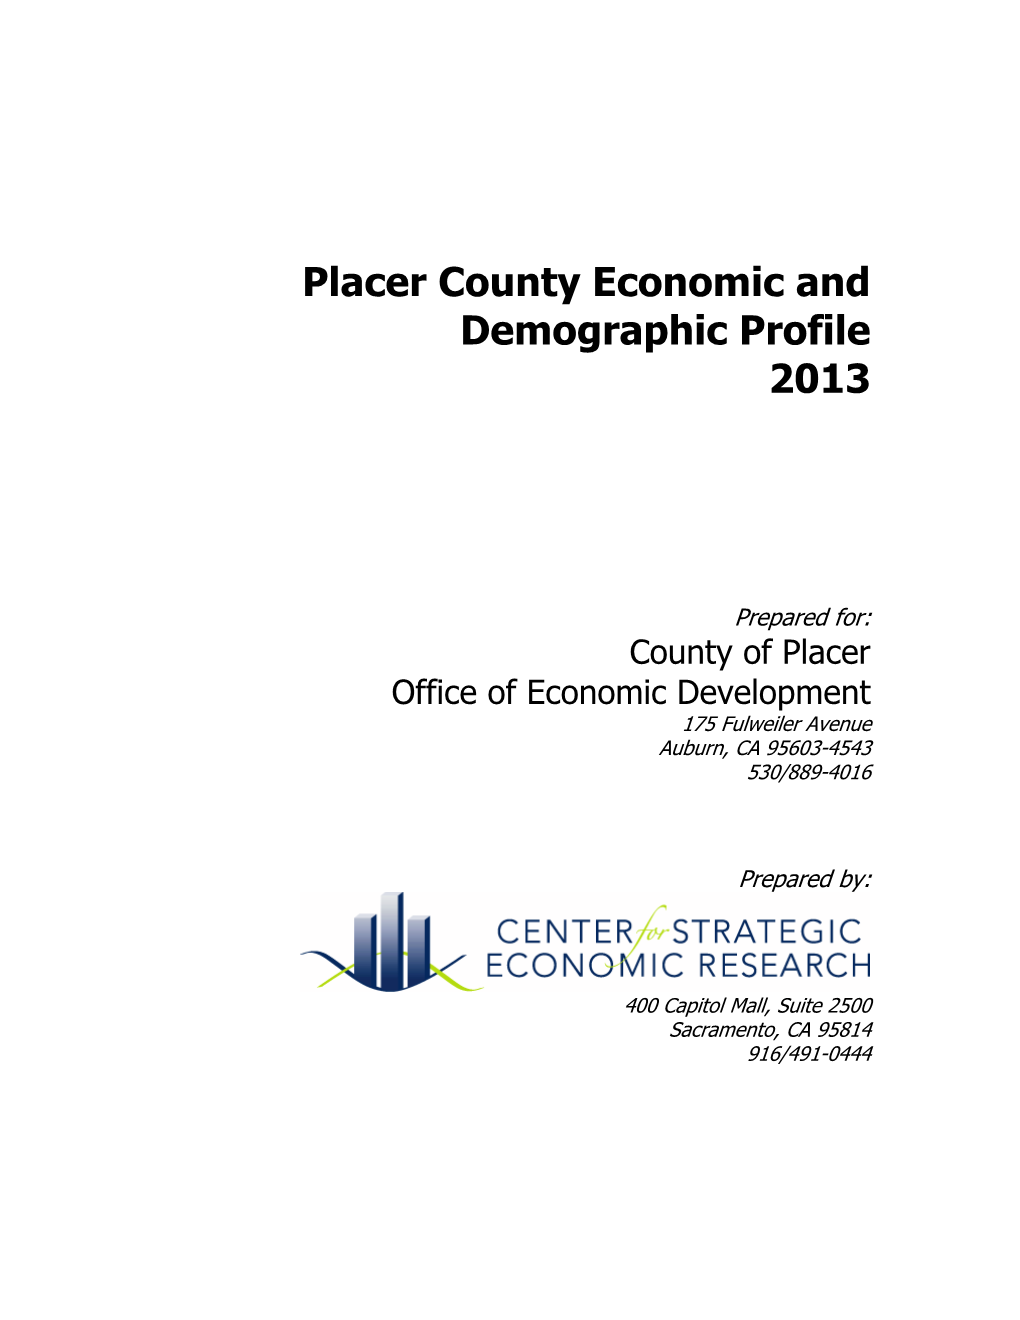 Placer County Economic and Demographic Profile 2013